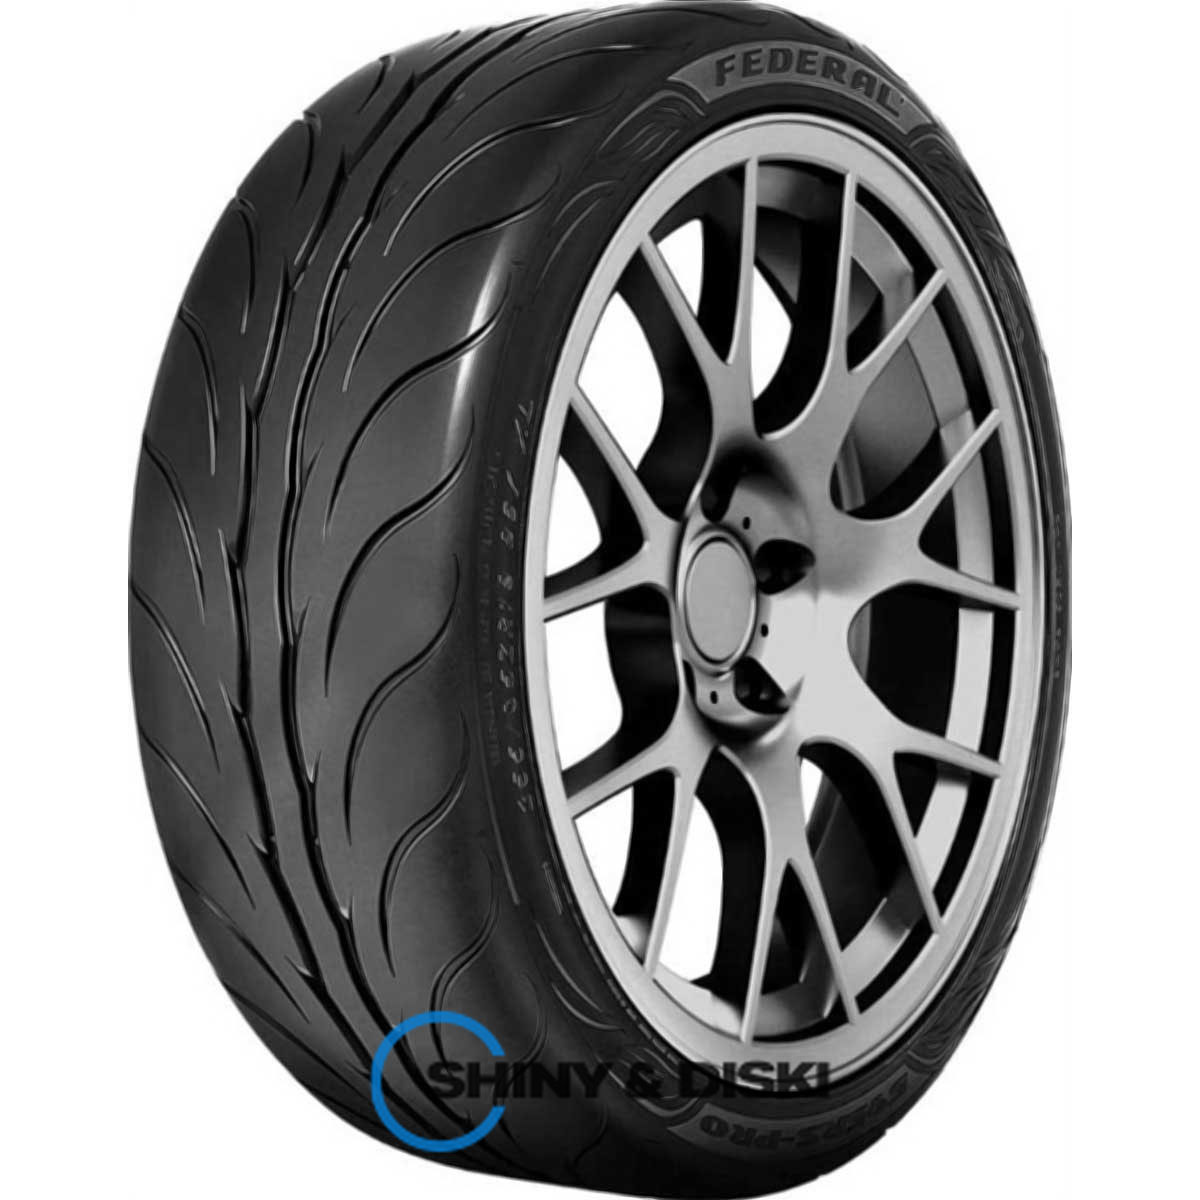 federal extreme performance 595 rs-pro 205/50 r15 89w xl